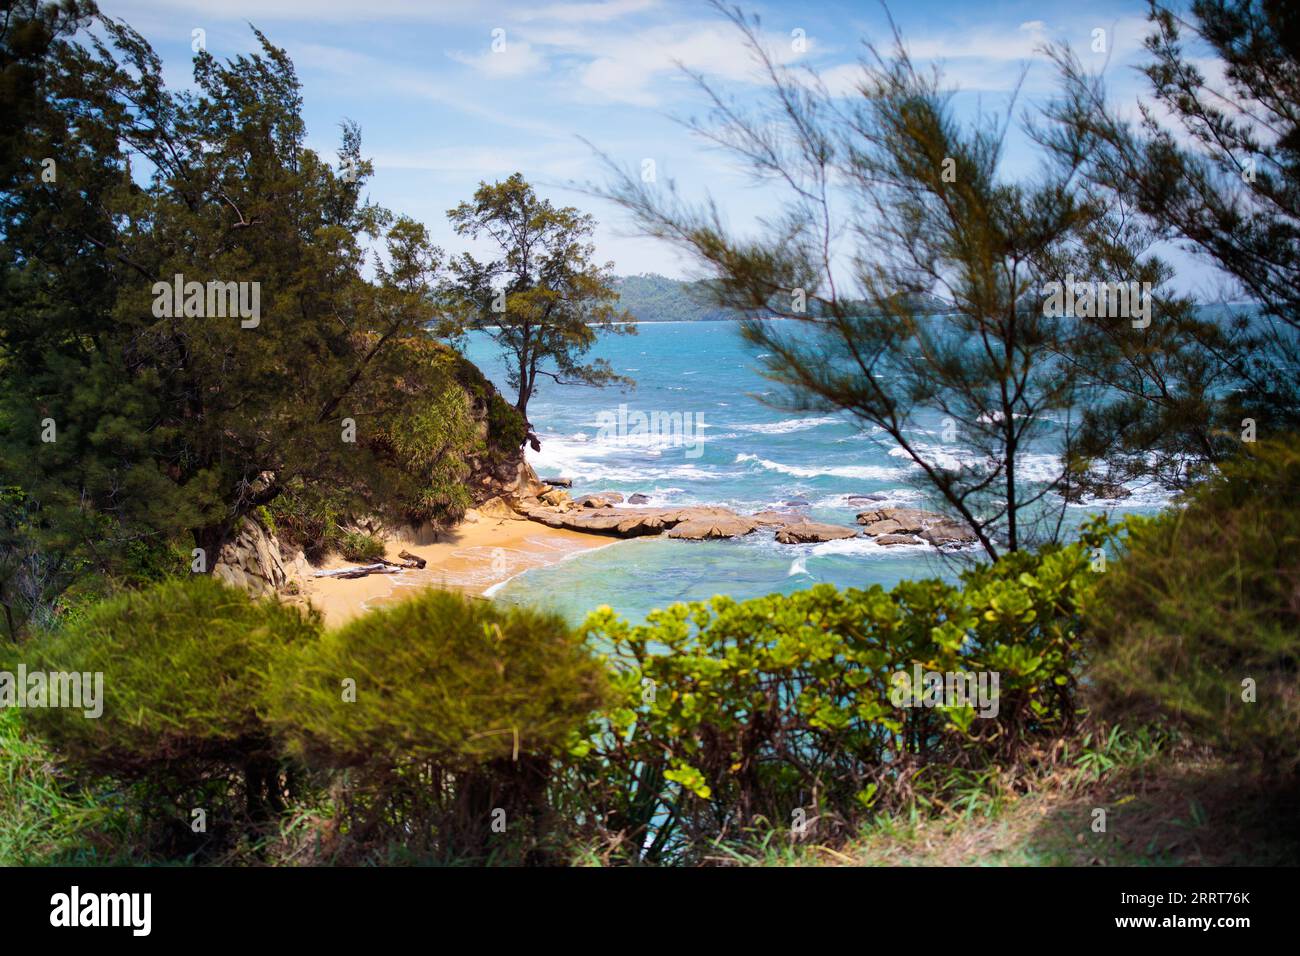 Scenic view of ocean bay from a hill. Hiking and travel. Tip of Borneo, East Malaysia. Visit Asia. Sea beach surrounded by rocks. Stock Photo